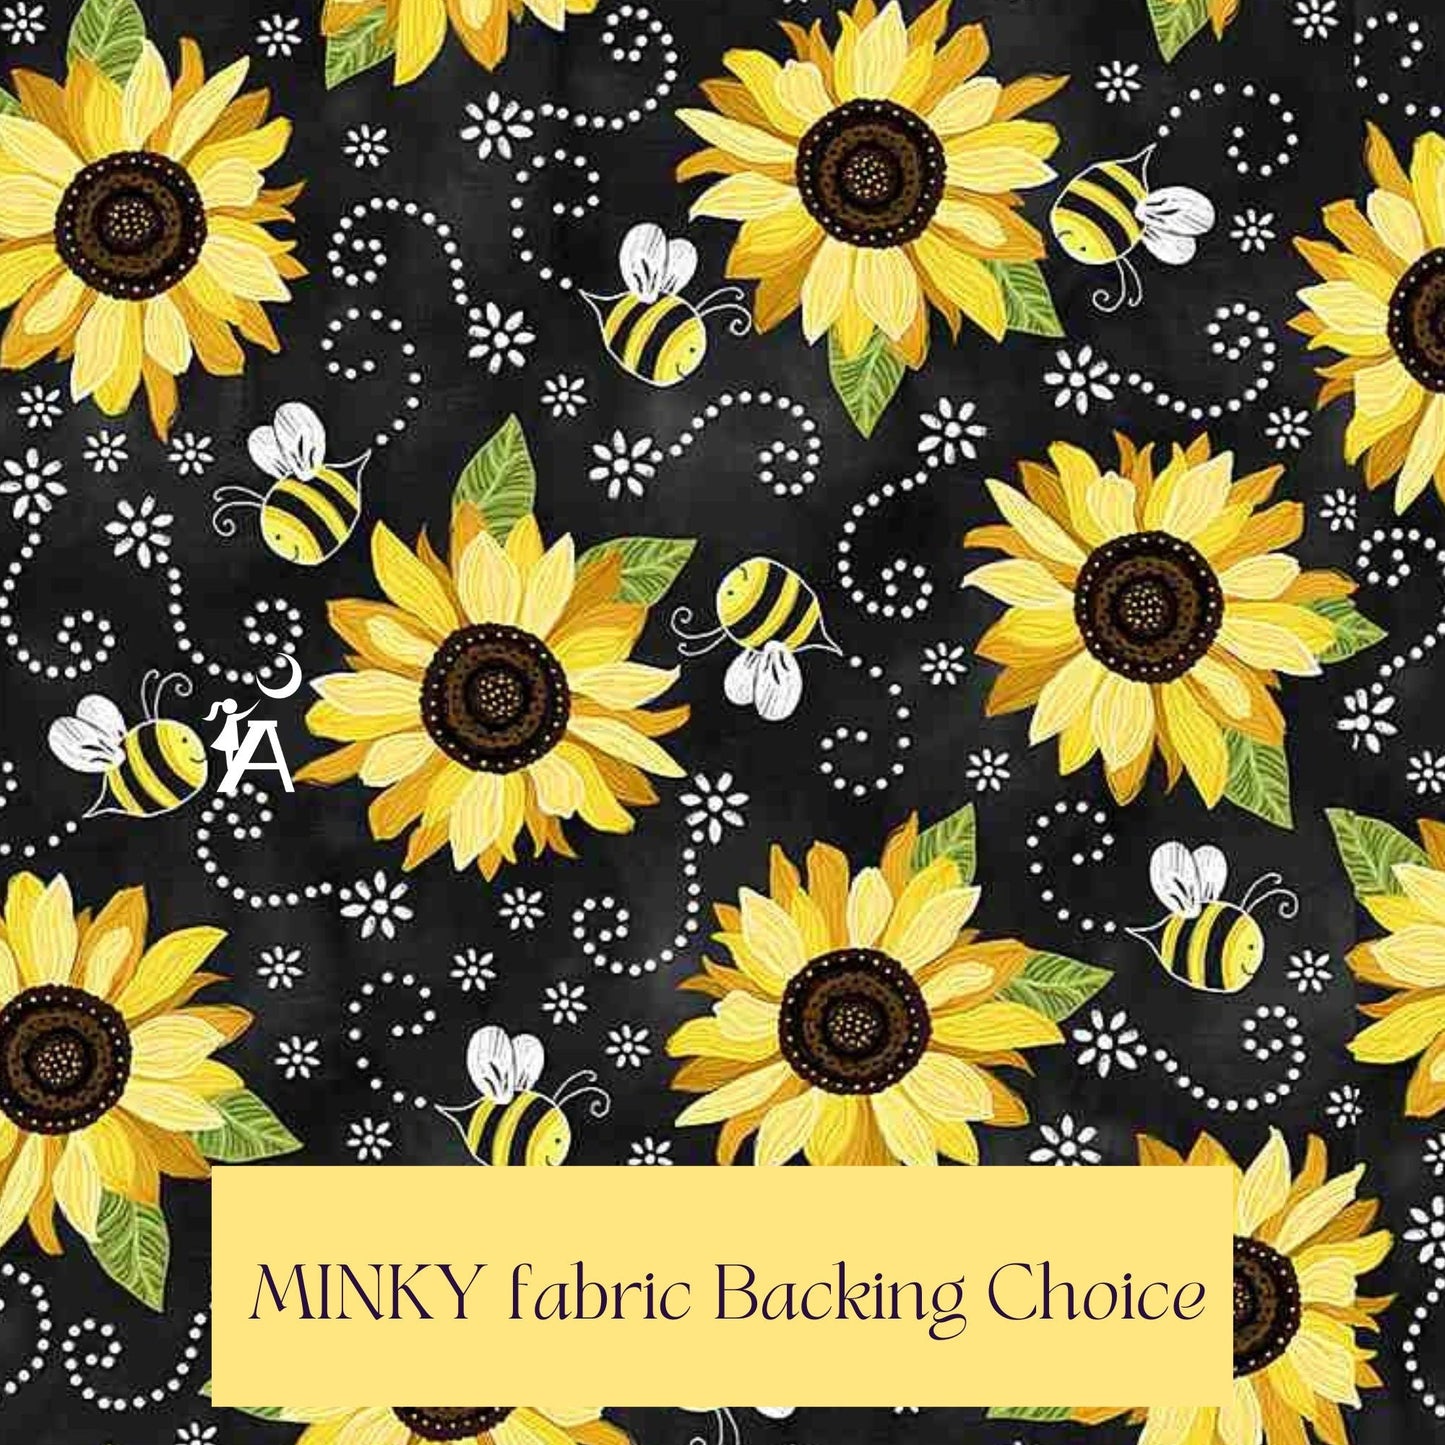 Timeless Treasures Quilt Kit Kit w/Minky Backing You are my Sunshine Beginner Quilt Kit with pattern & Fabric, Easy DIY, Picture This Pattern with Sunflower Panel